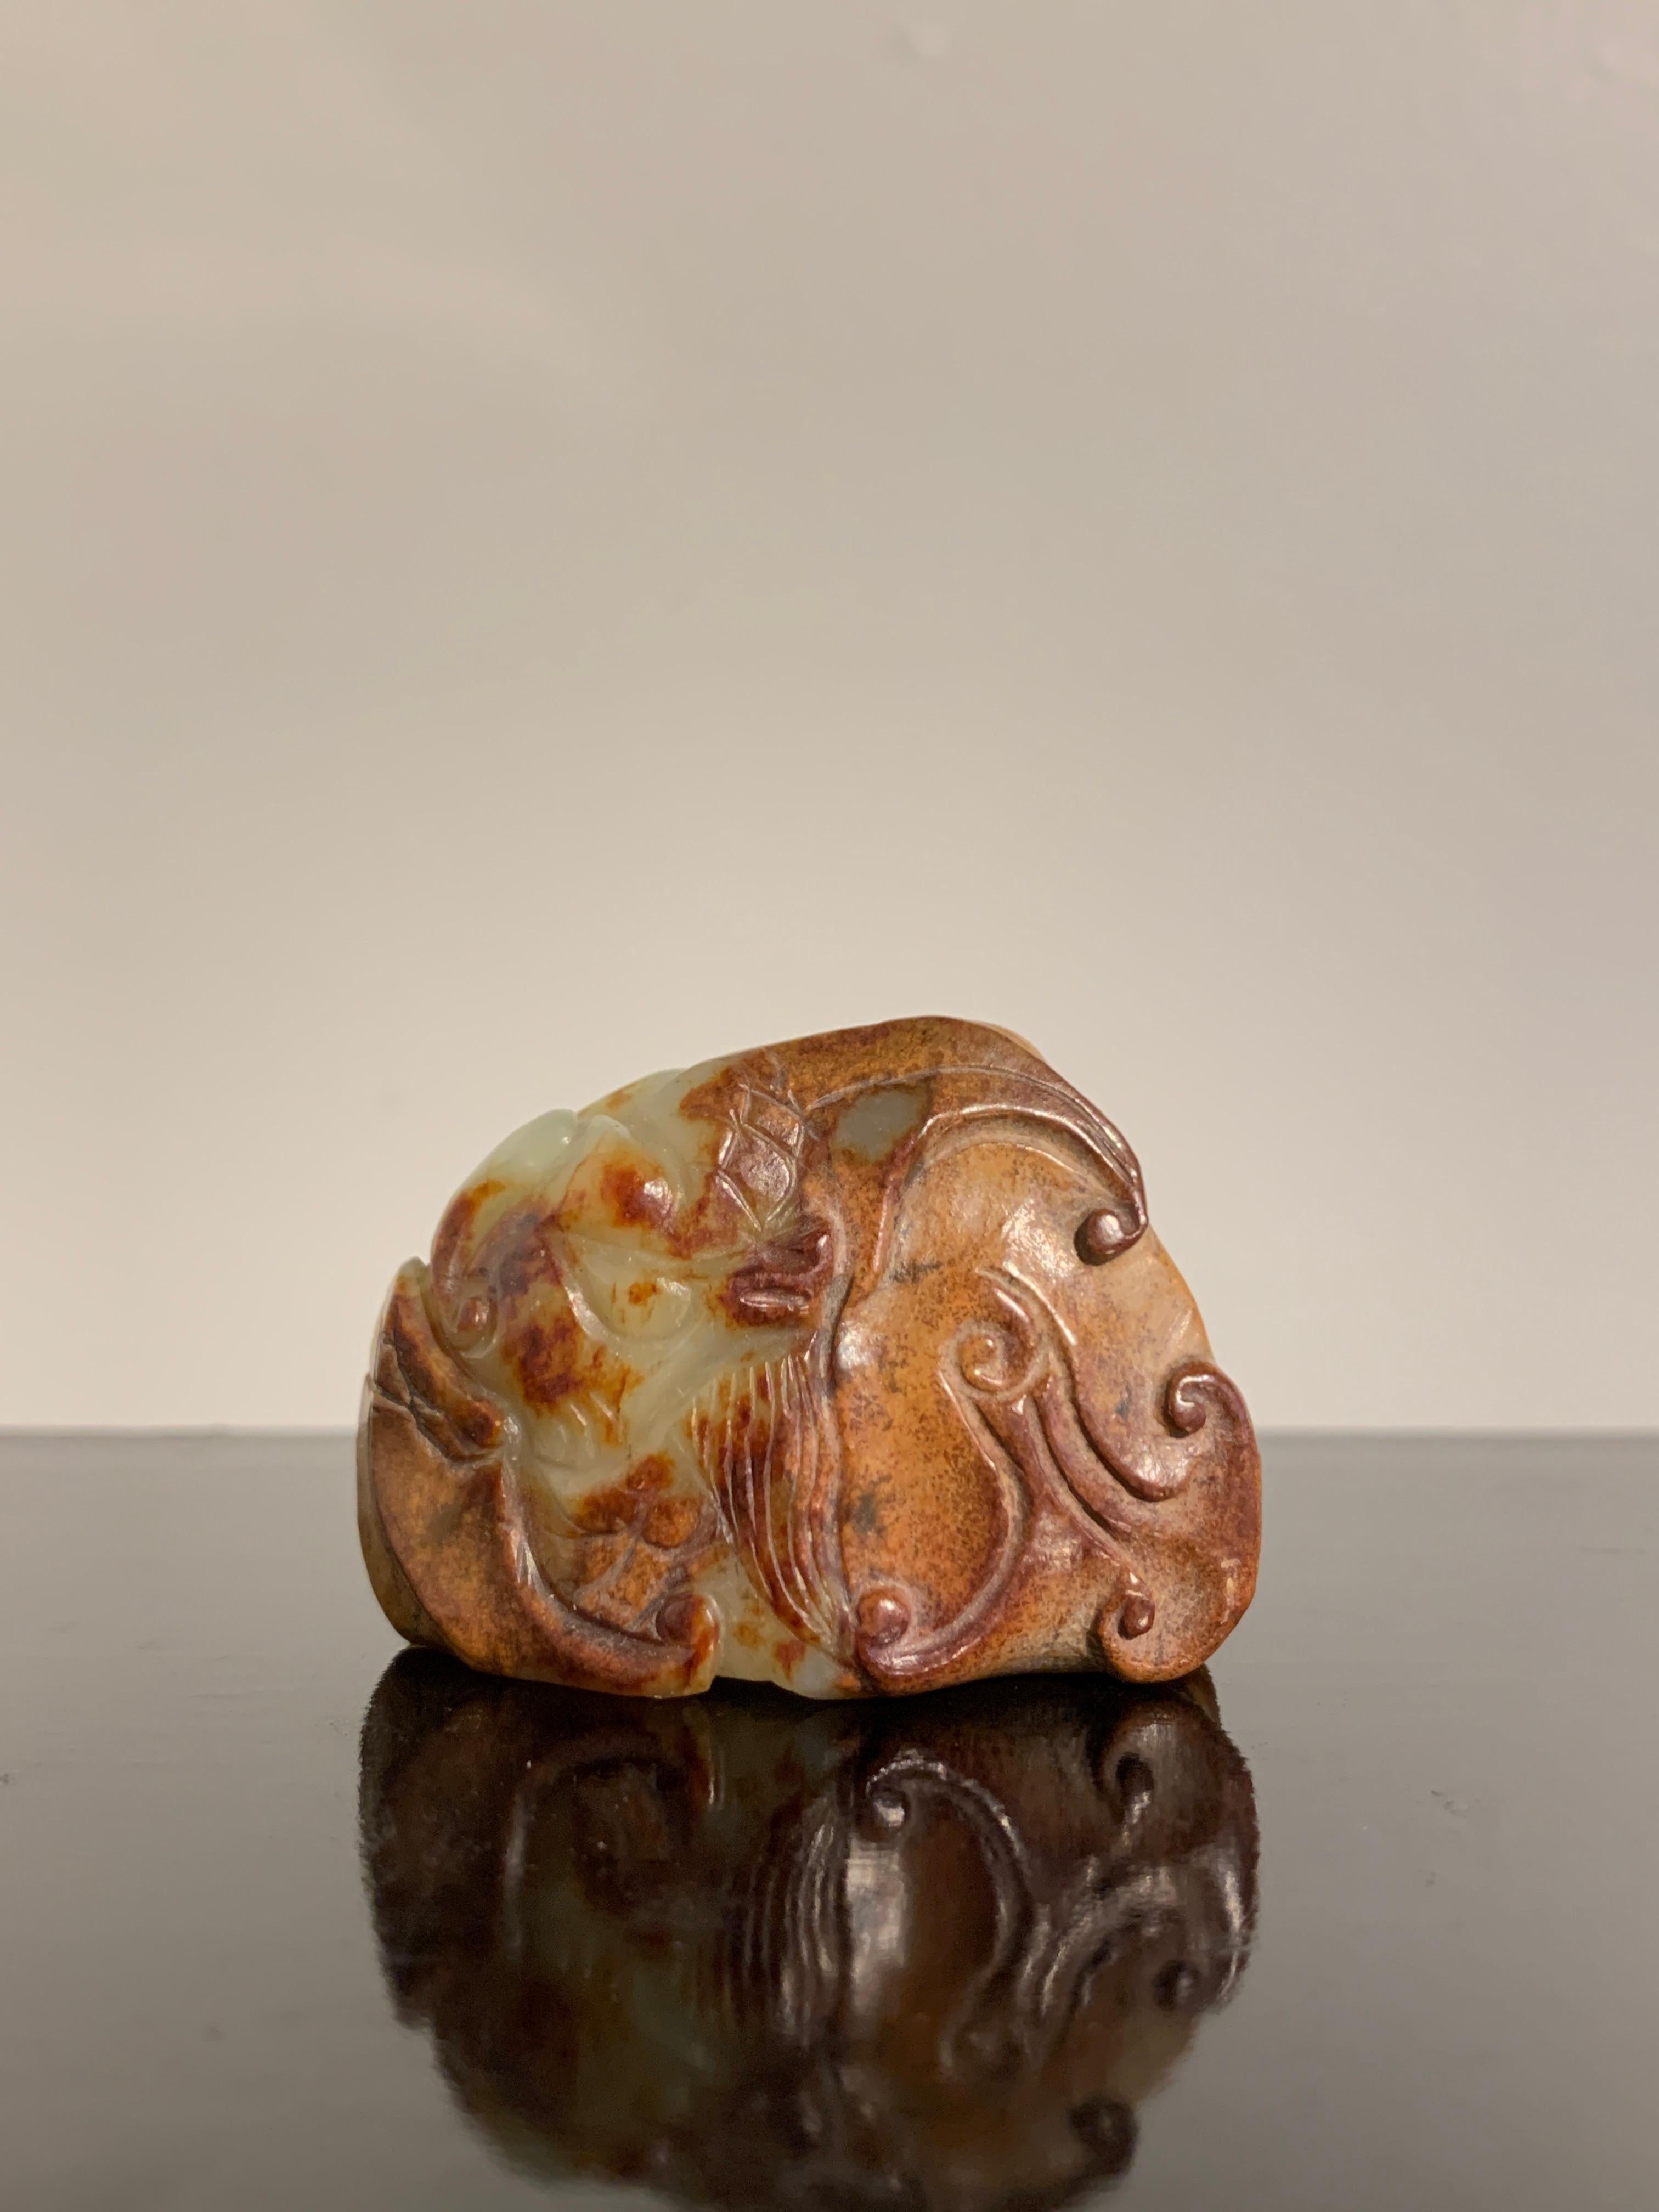 A superb Chinese yellow and russet nephrite jade carving of a mythical beast, Ming Dynasty (1368 to 1644) or earlier, China

The mythical beast is portrayed with feline features, including a muscular, compact body, a broad face with flattened